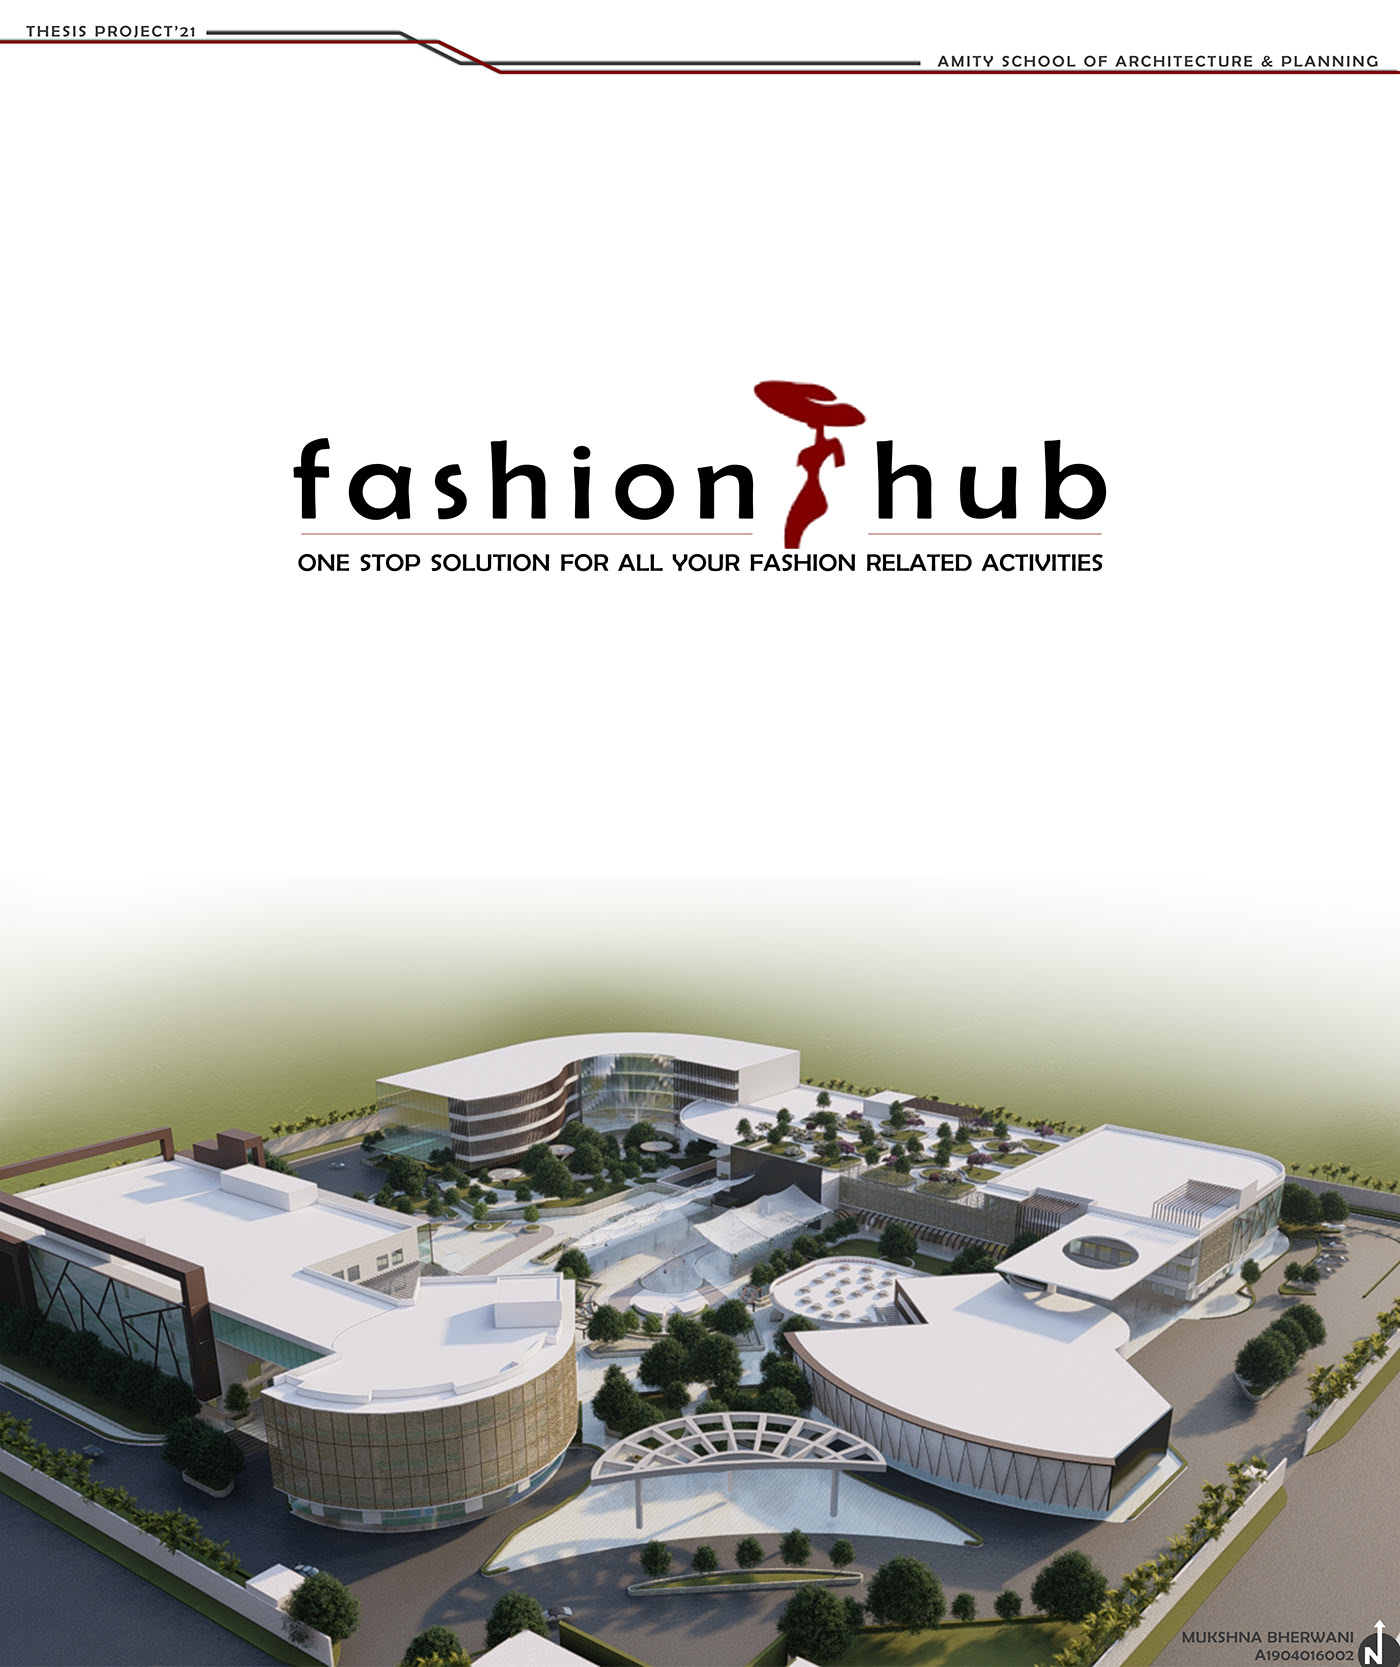 architectural thesis on fashion institute pdf